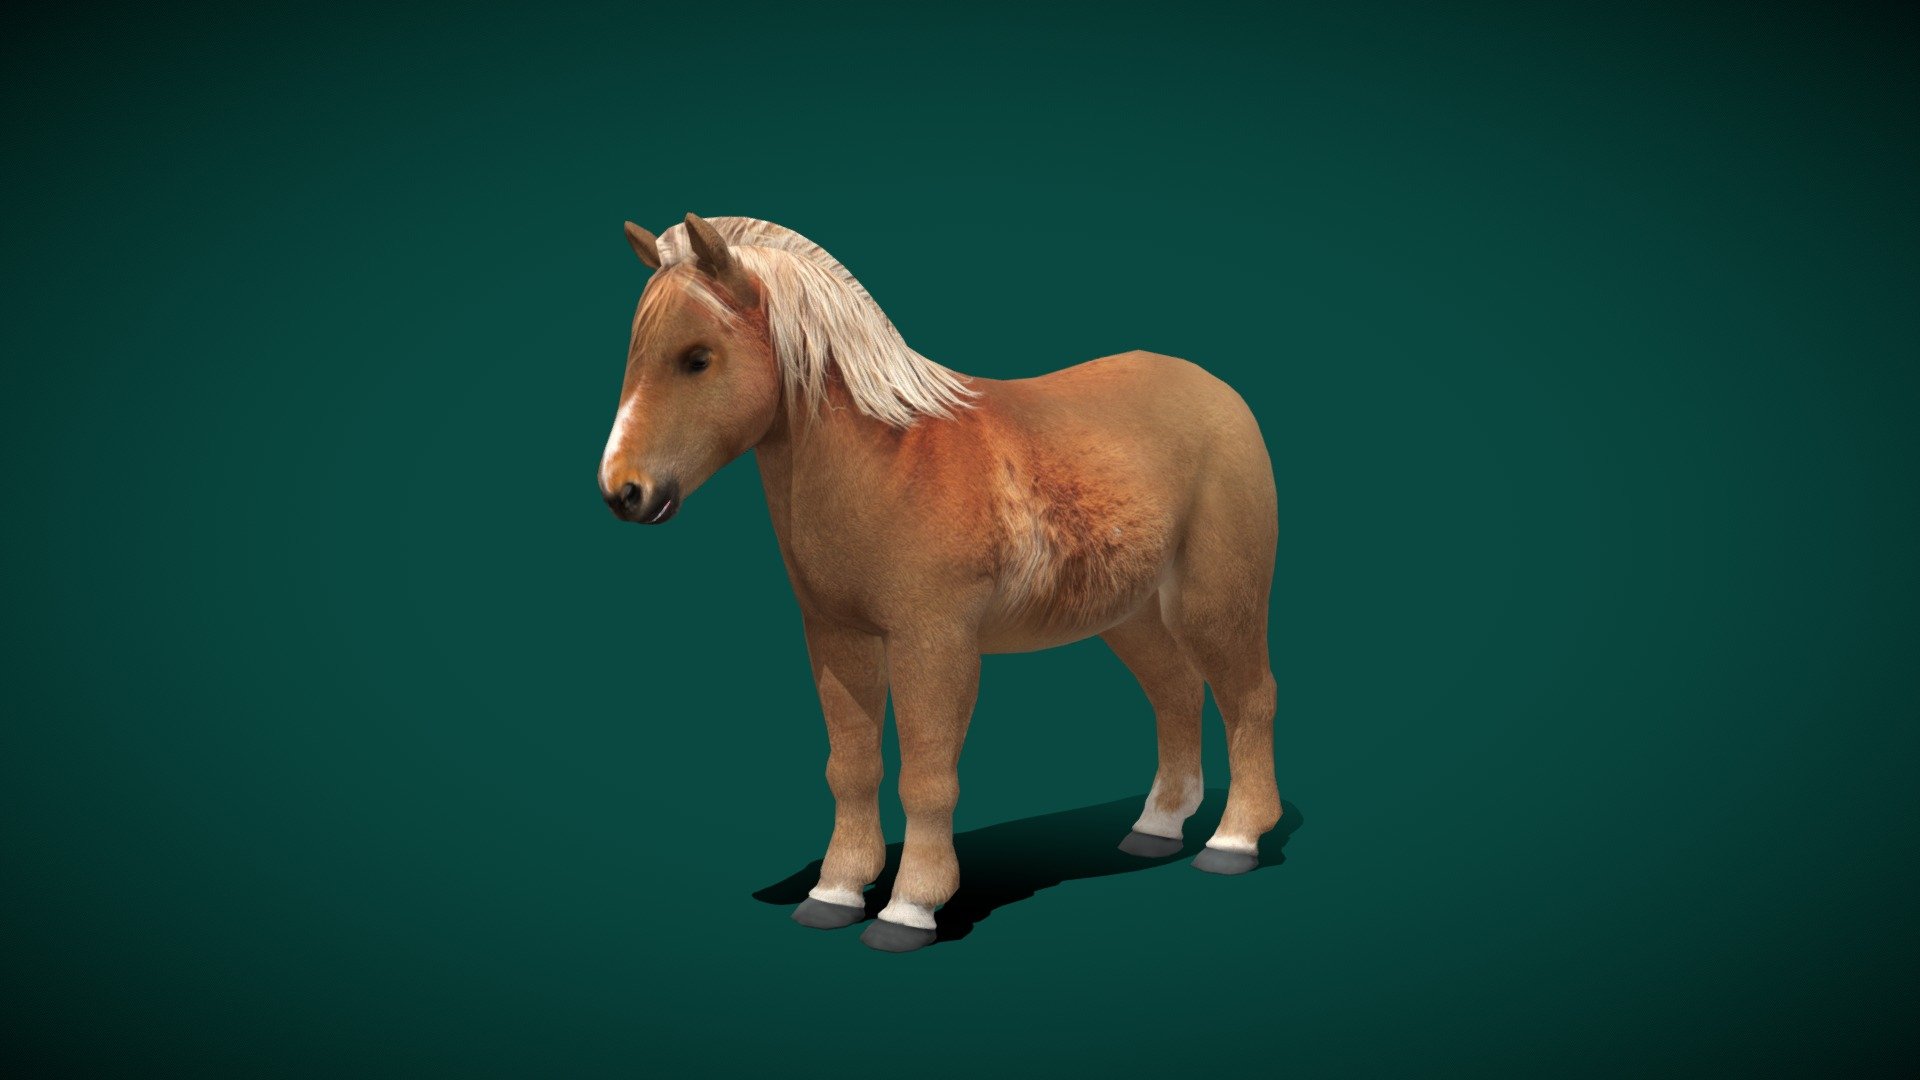 Equus ferus caballus (Small horse) 

Pony Small Horse Mammal Animal   (Low poly)

1 Draw Calls

Gameready

13 Animations

4K PBR Textures Material

Unreal FBX

Unity FBX  

Blend File 

USDZ File (AR Ready). Real Scale Dimension

Textures Files

GLB File

Gltf File ( Spark AR, Lens Studio(SnapChat) , Effector(Tiktok) , Spline, Play Canvas ) Compatible



Triangles: 9000

Vertices: 4700

Diffuse , Metallic, Roughness , Normal Map ,Specular Map,AO
A pony is a type of small horse (Equus_ferus_caballus). Depending on the context, a pony may be a horse that is under a given approximate or exact height at the withers, or a small horse with a specific conformation and temperament. Compared to a larger horse, a pony may have a thicker coat, mane and tail, with proportionally shorter legs, a wider barrel, heavier bone, a thicker neck and a shorter, broader head. The word pony derives from the old French poulenet, meaning foal, a young, immature horse 3d model